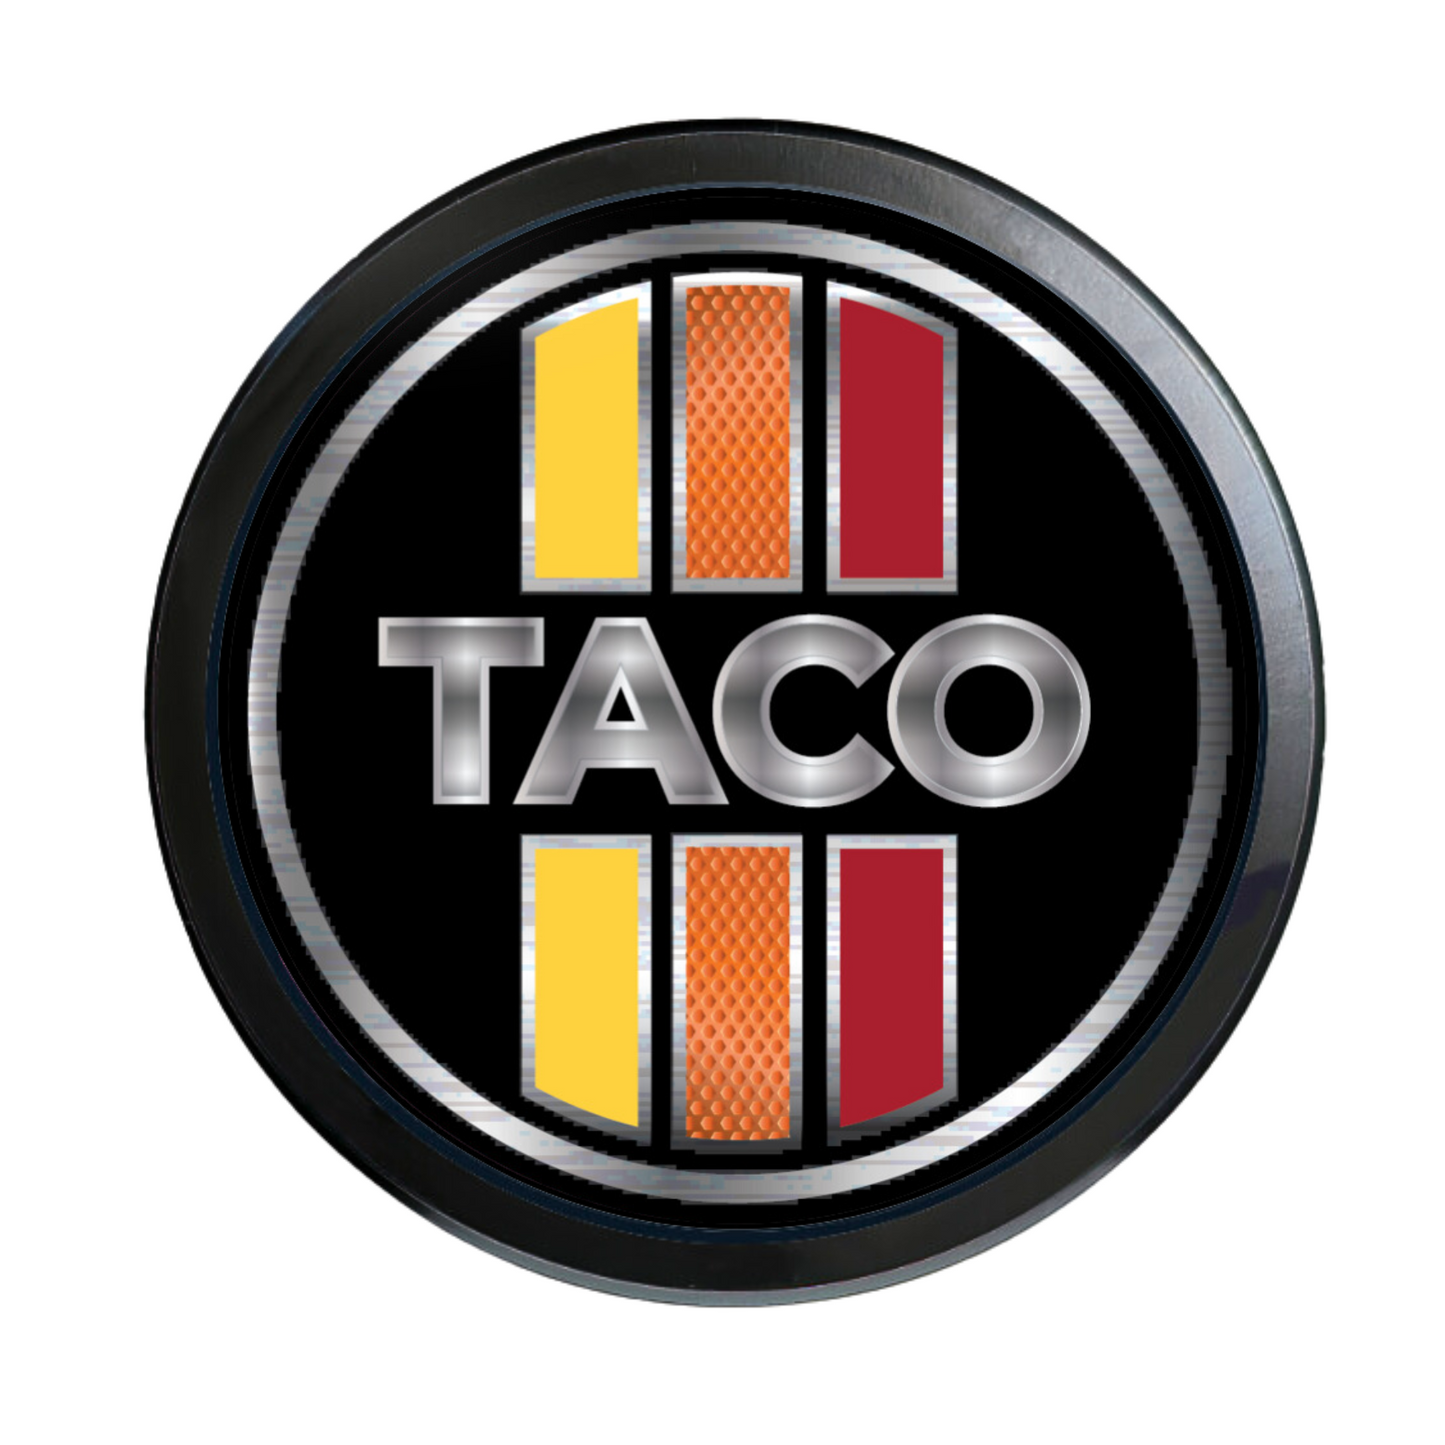 Standard Tacoma Grille Badge - Looking for Tri Color aftermarket grille or badge parts for Tacoma SR5, TRD Sport, TRD Off-road, TRD Pro Limited Tacoma Lifestyle or largest forum Tacoma World Fits TRD Badge Tacoma Badge, Tri Color Style Vinyl Upland